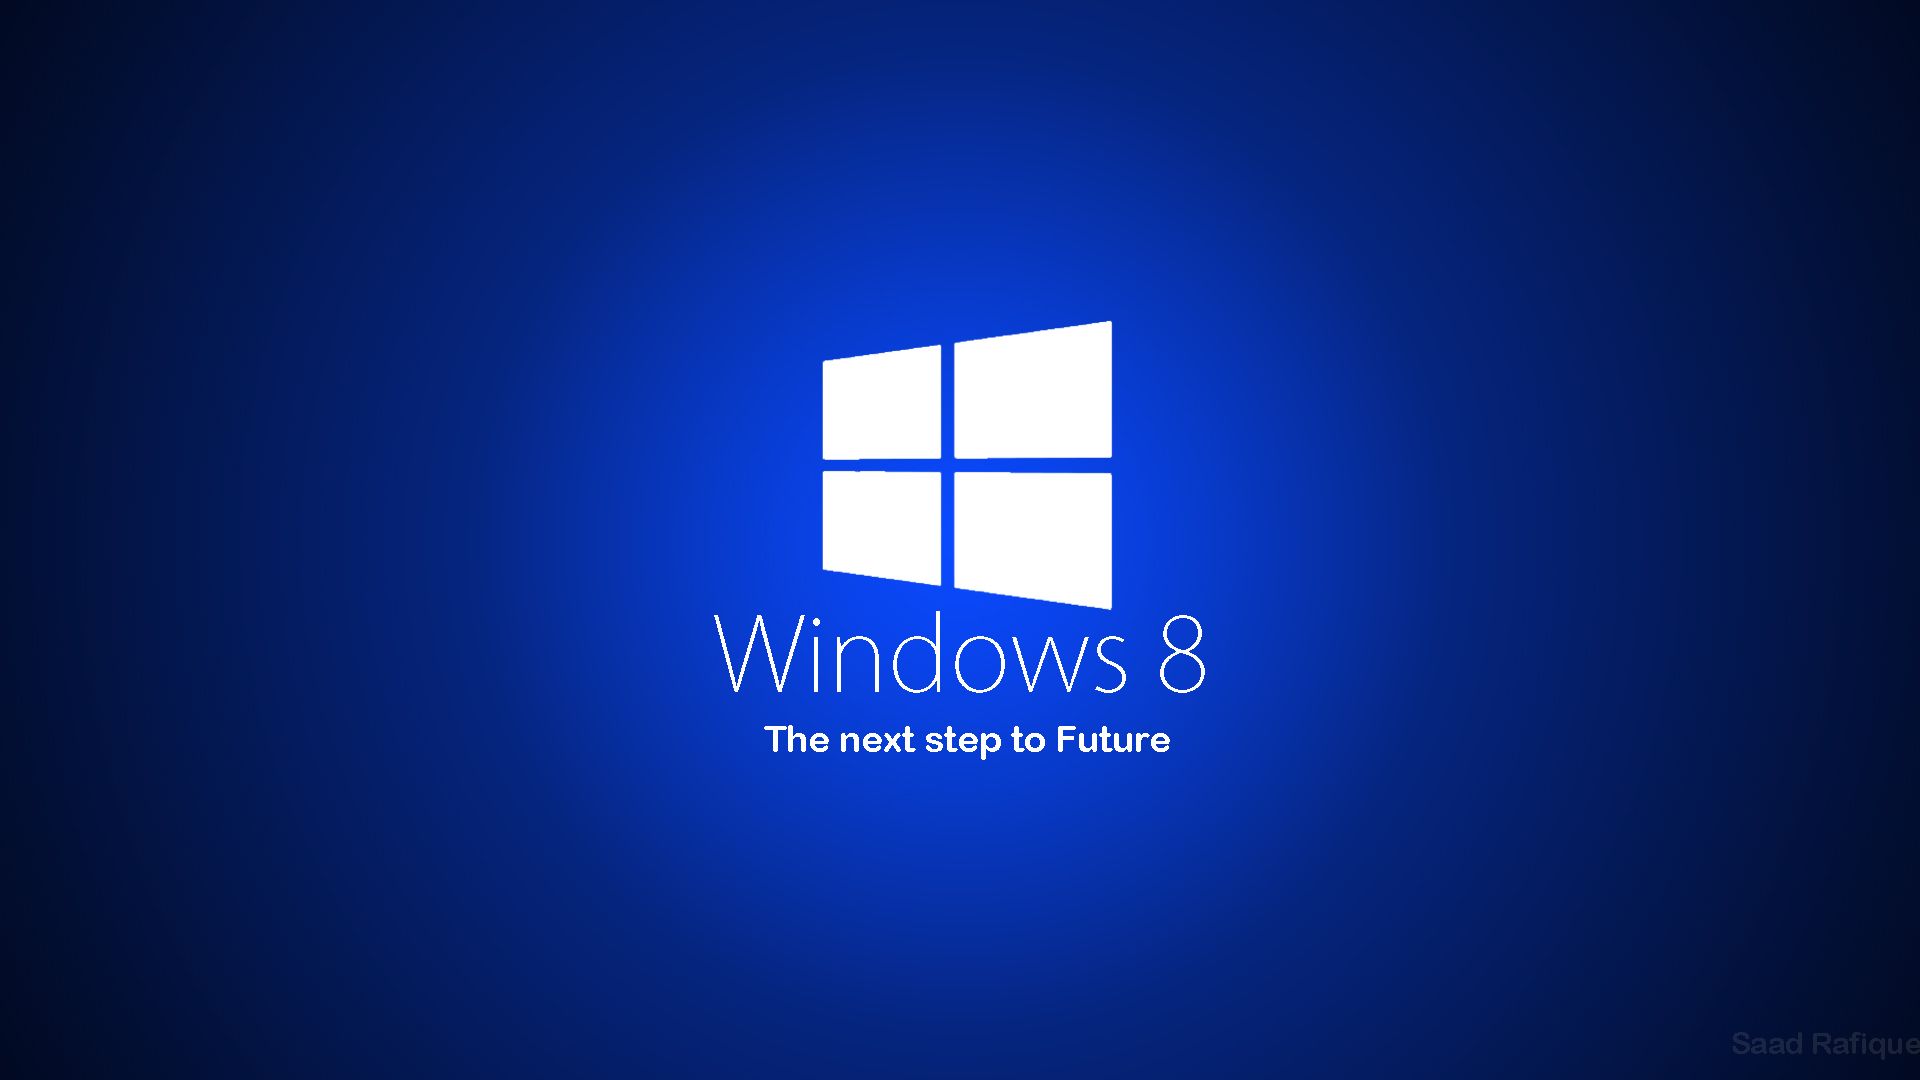 Windows 8 Themes Wallpapers nicepcwallpapers